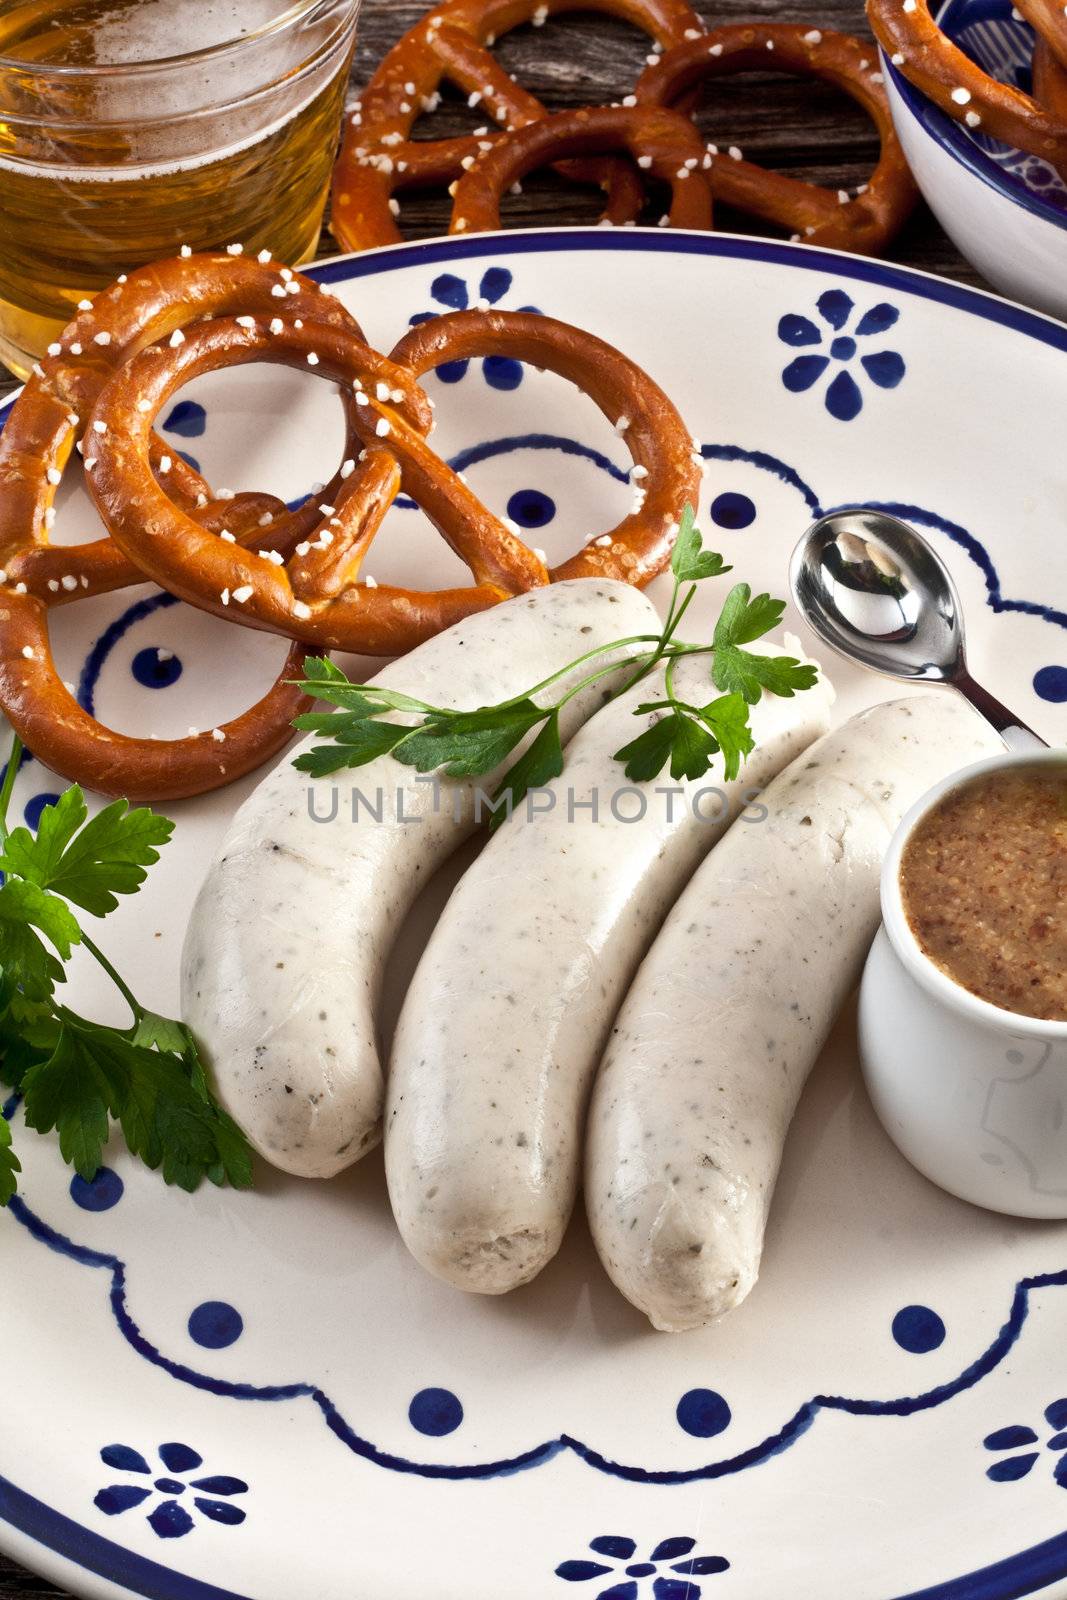 weisswurst by maxg71